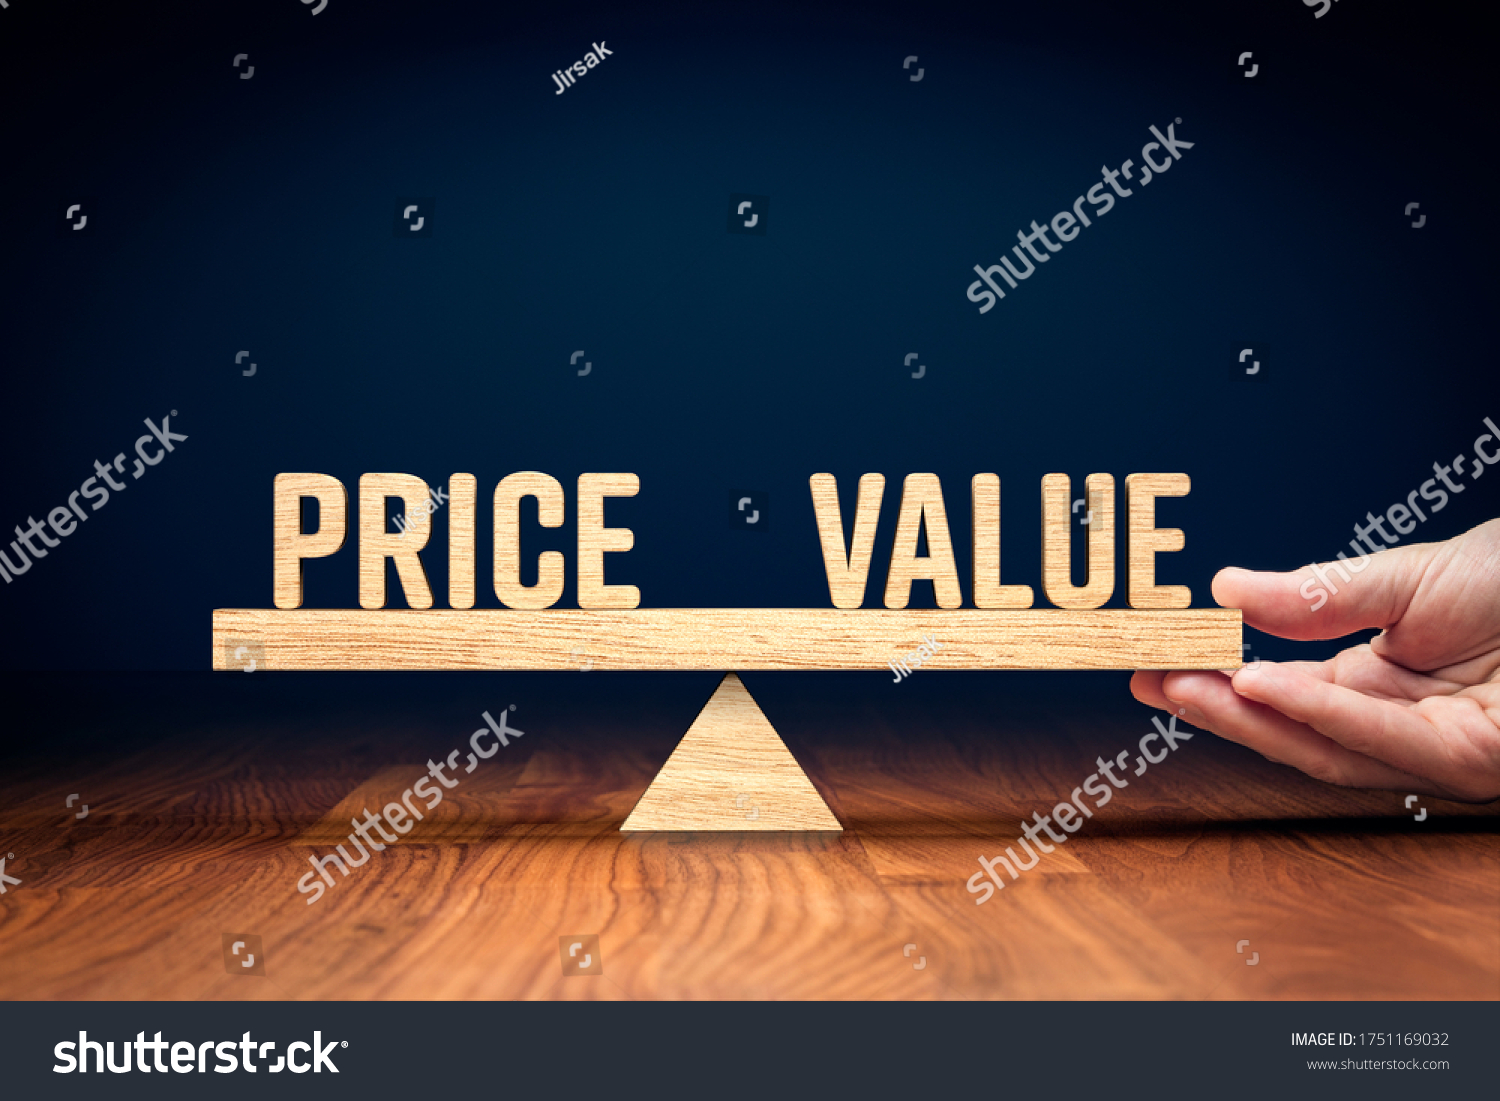 Price and value balance marketing concept. Hand of manager balancing texts price and value. #1751169032